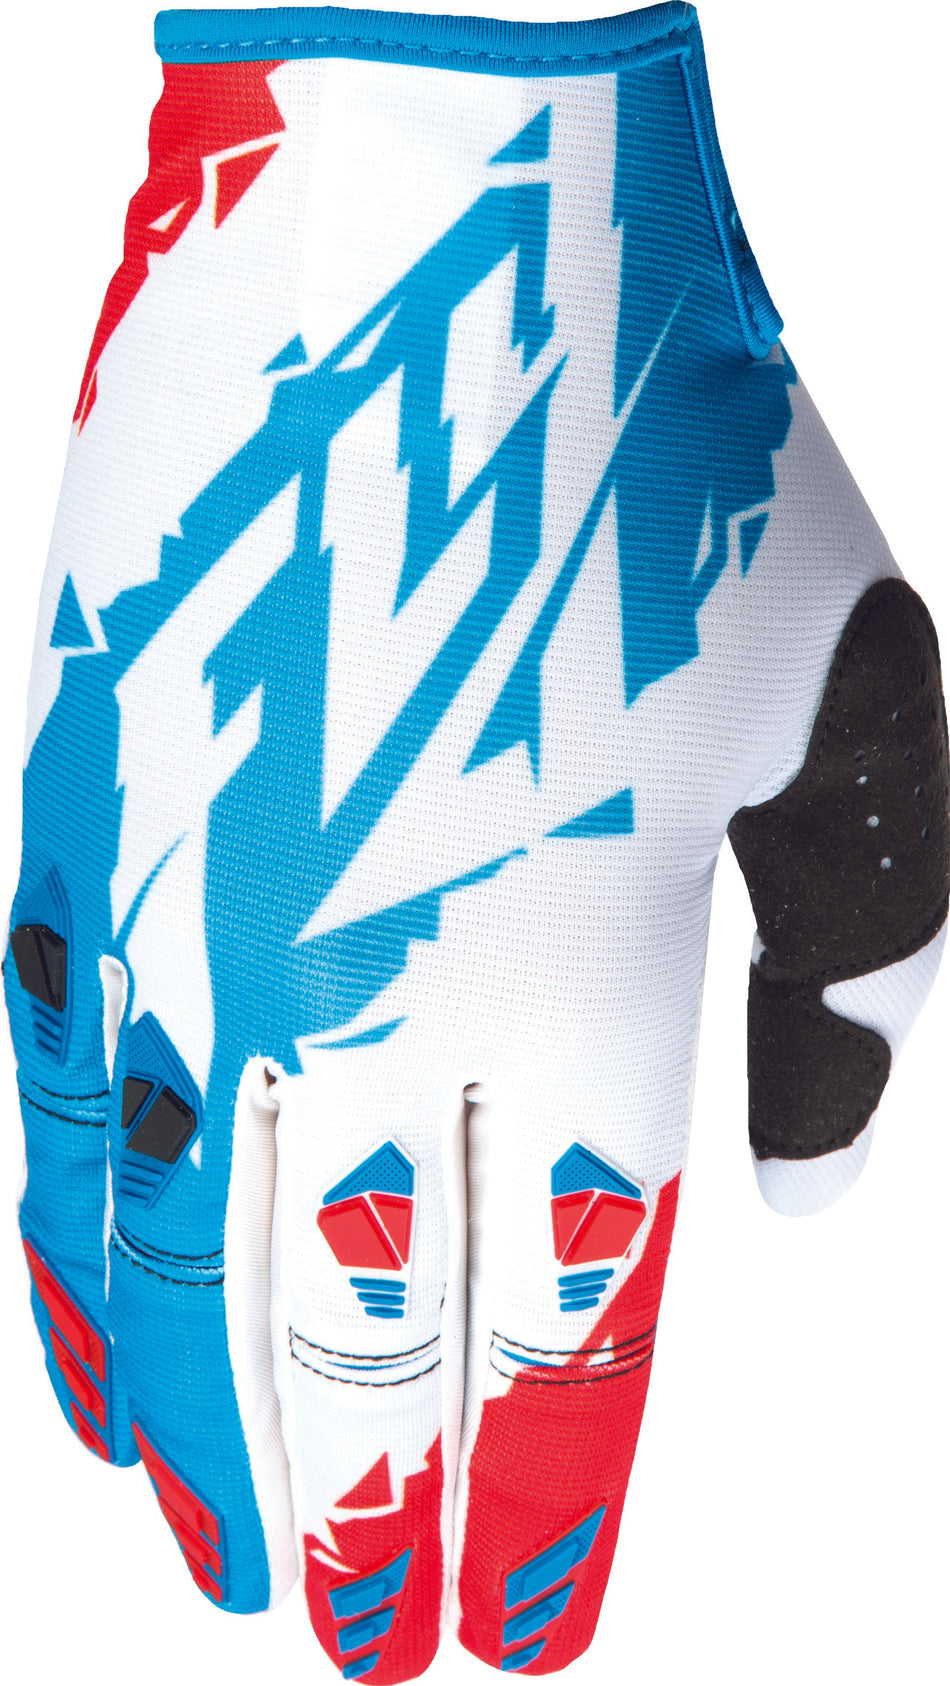 FLY RACING Kinetic Glove Red/White/Blue Sz 8 S 370-41108